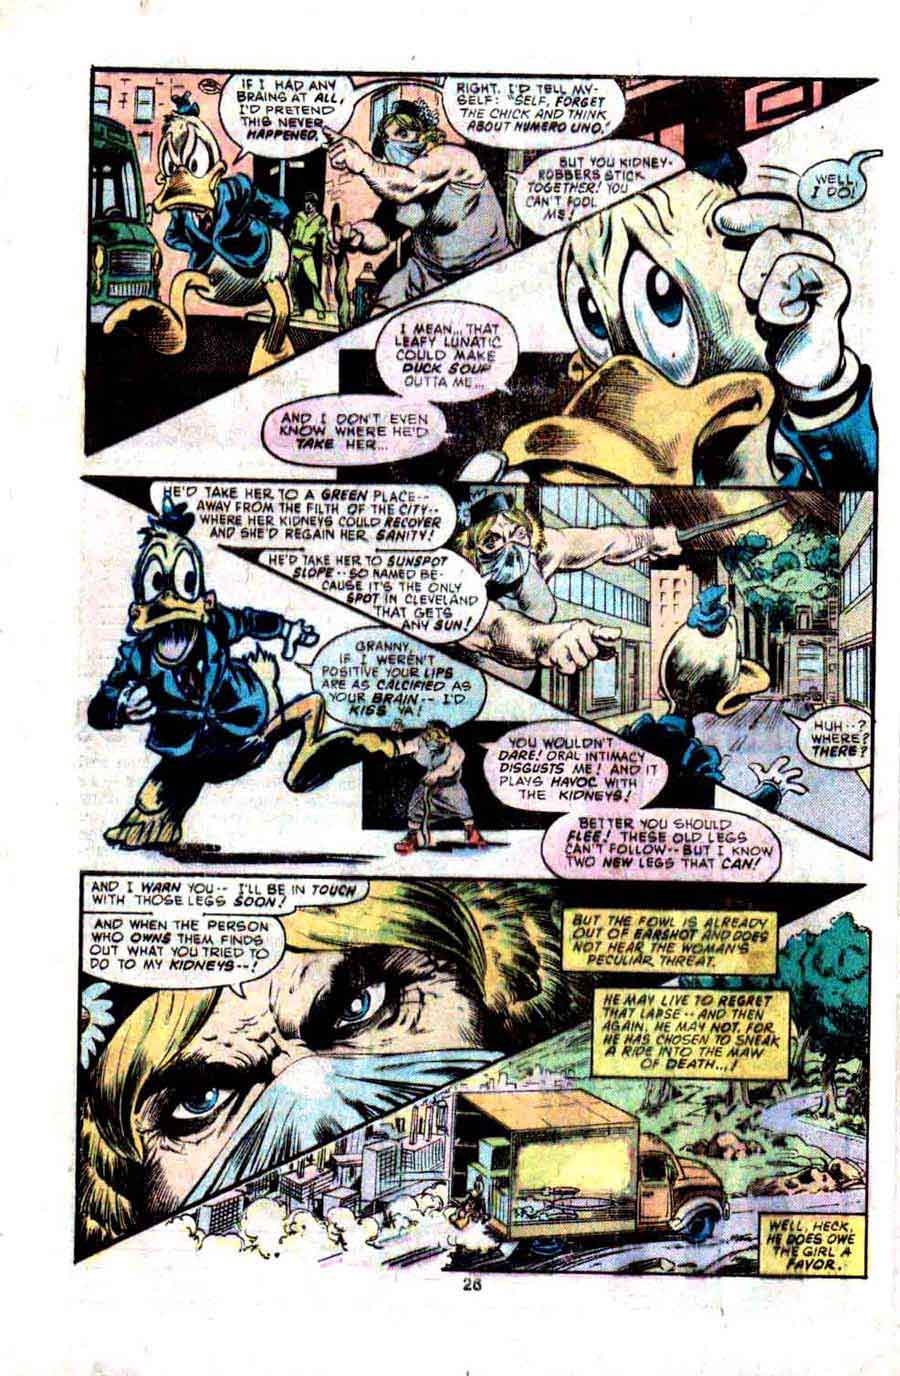 Howard the Duck v1 #2 marvel 1970s bronze age comic book page art by Frank Brunner